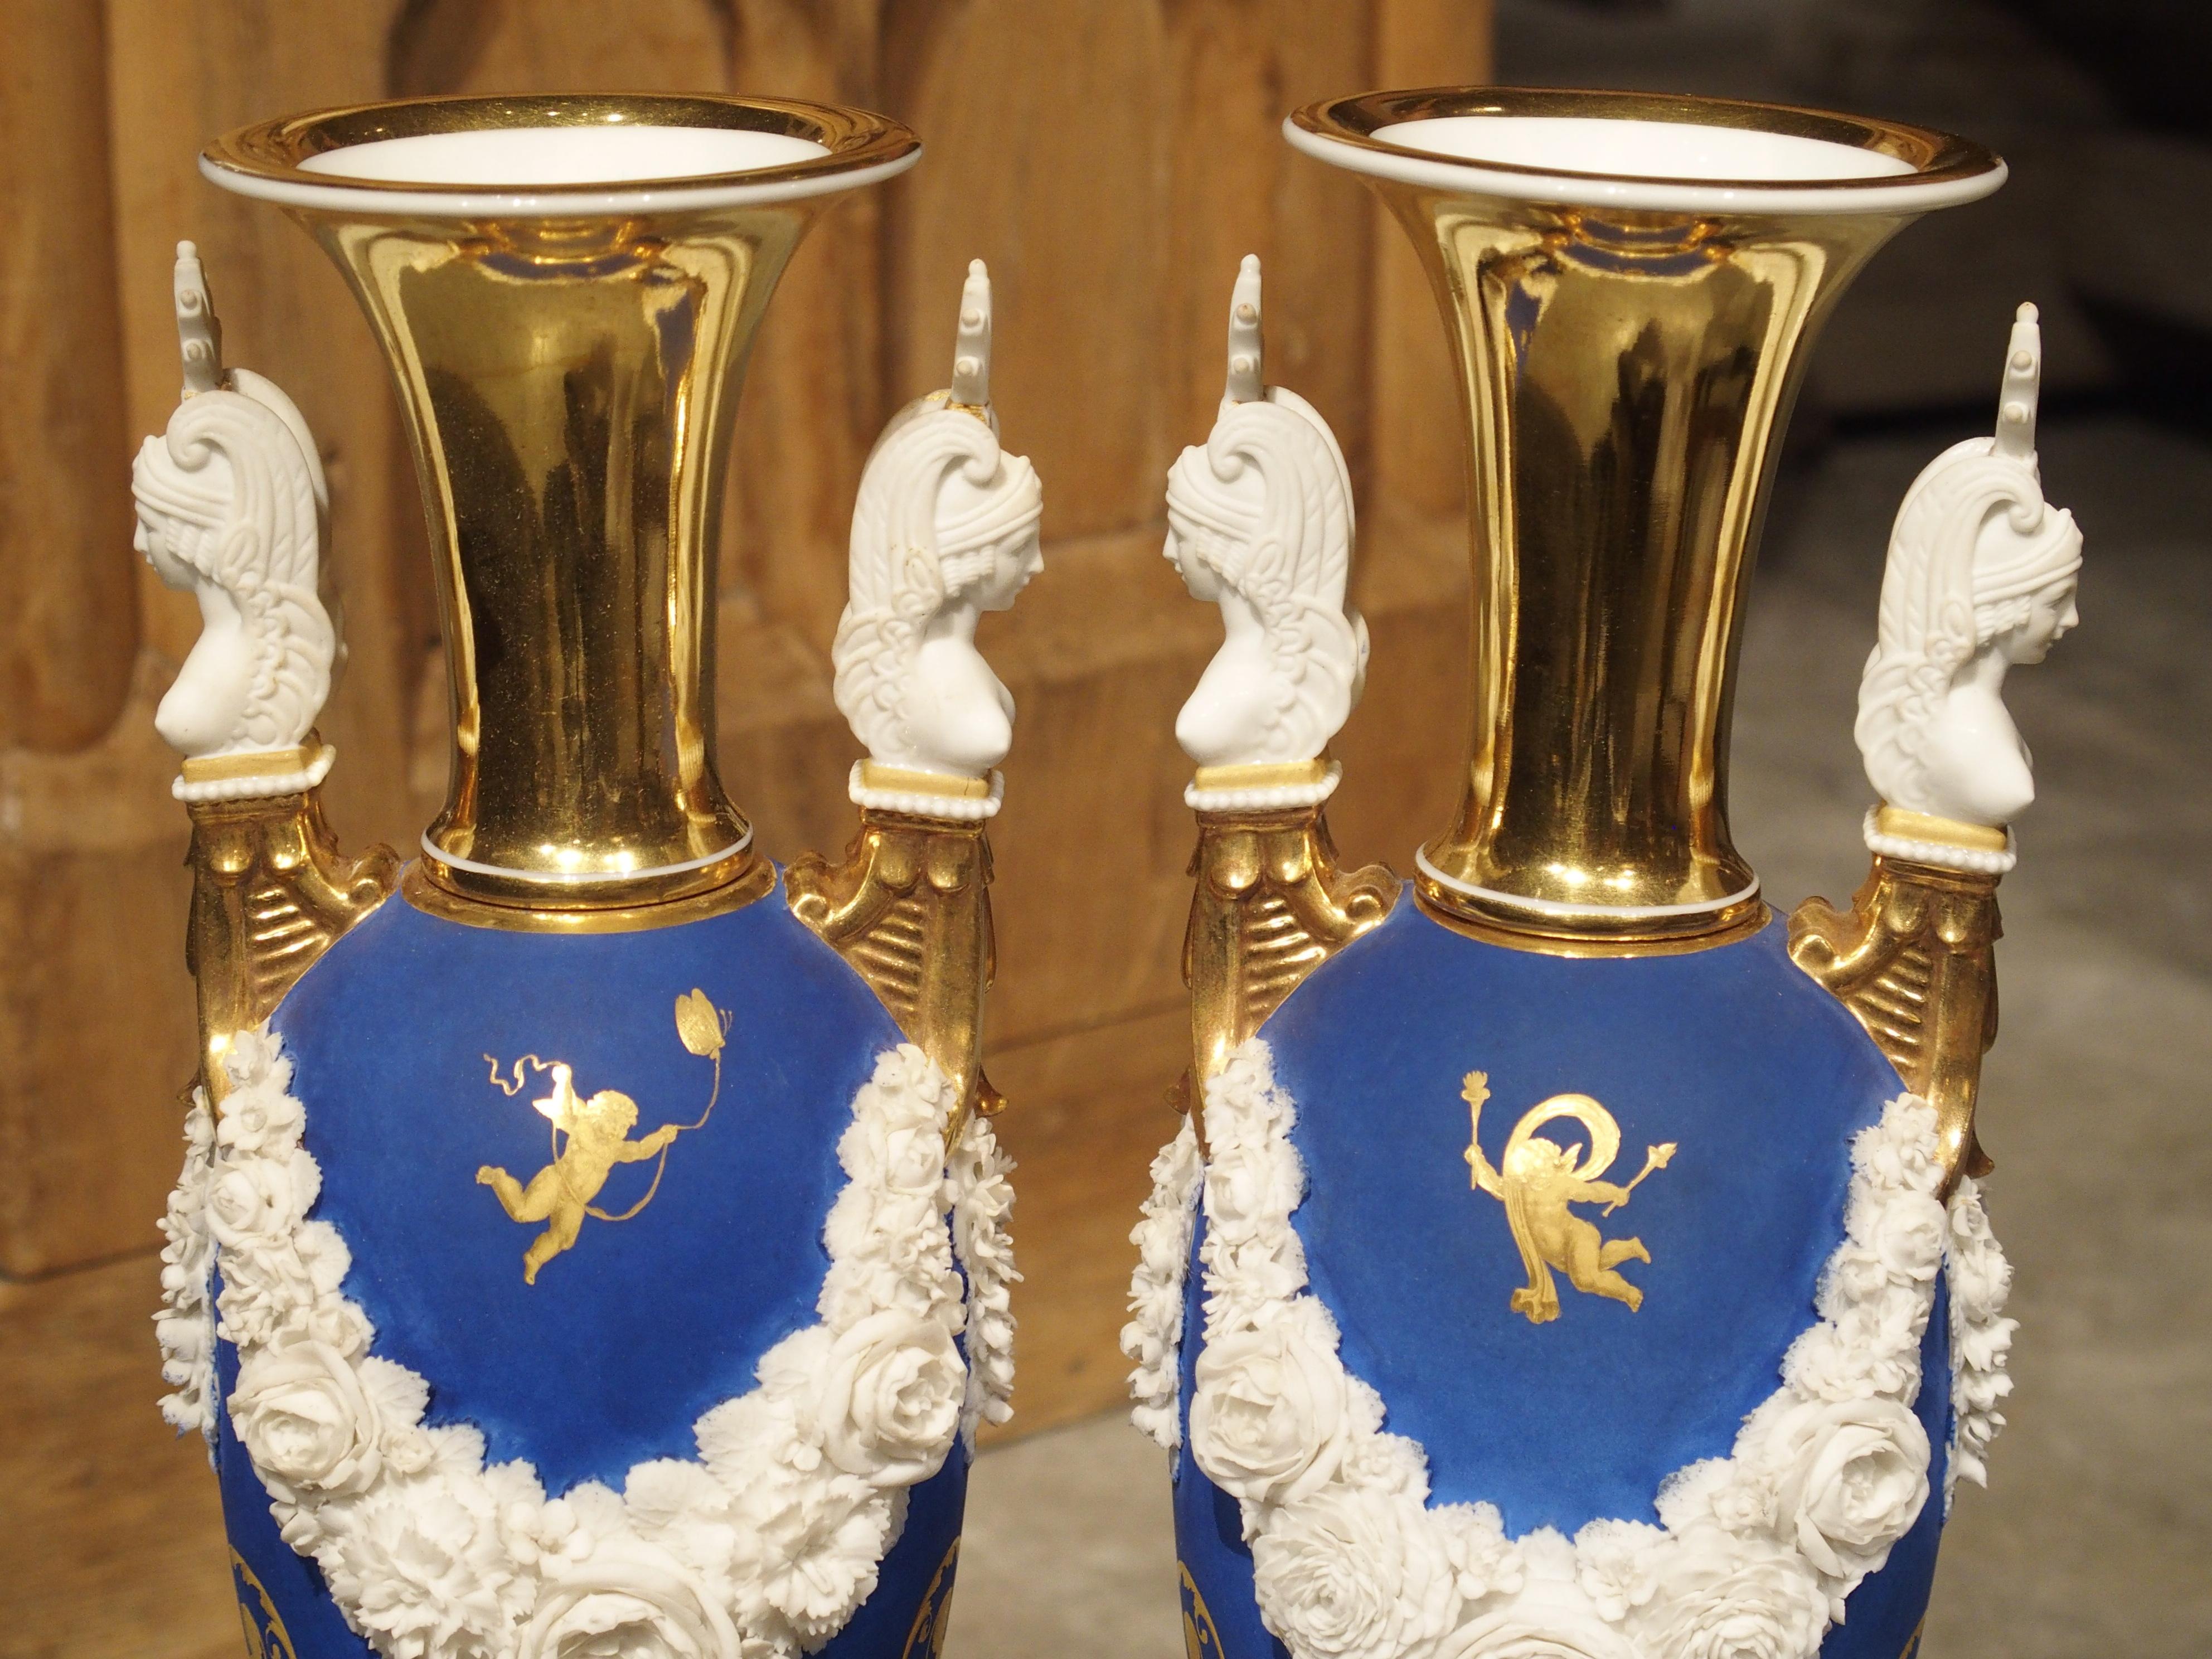 Pair of Neoclassical Paris Porcelain Vases in Royal French Blue, Early 1800s 11